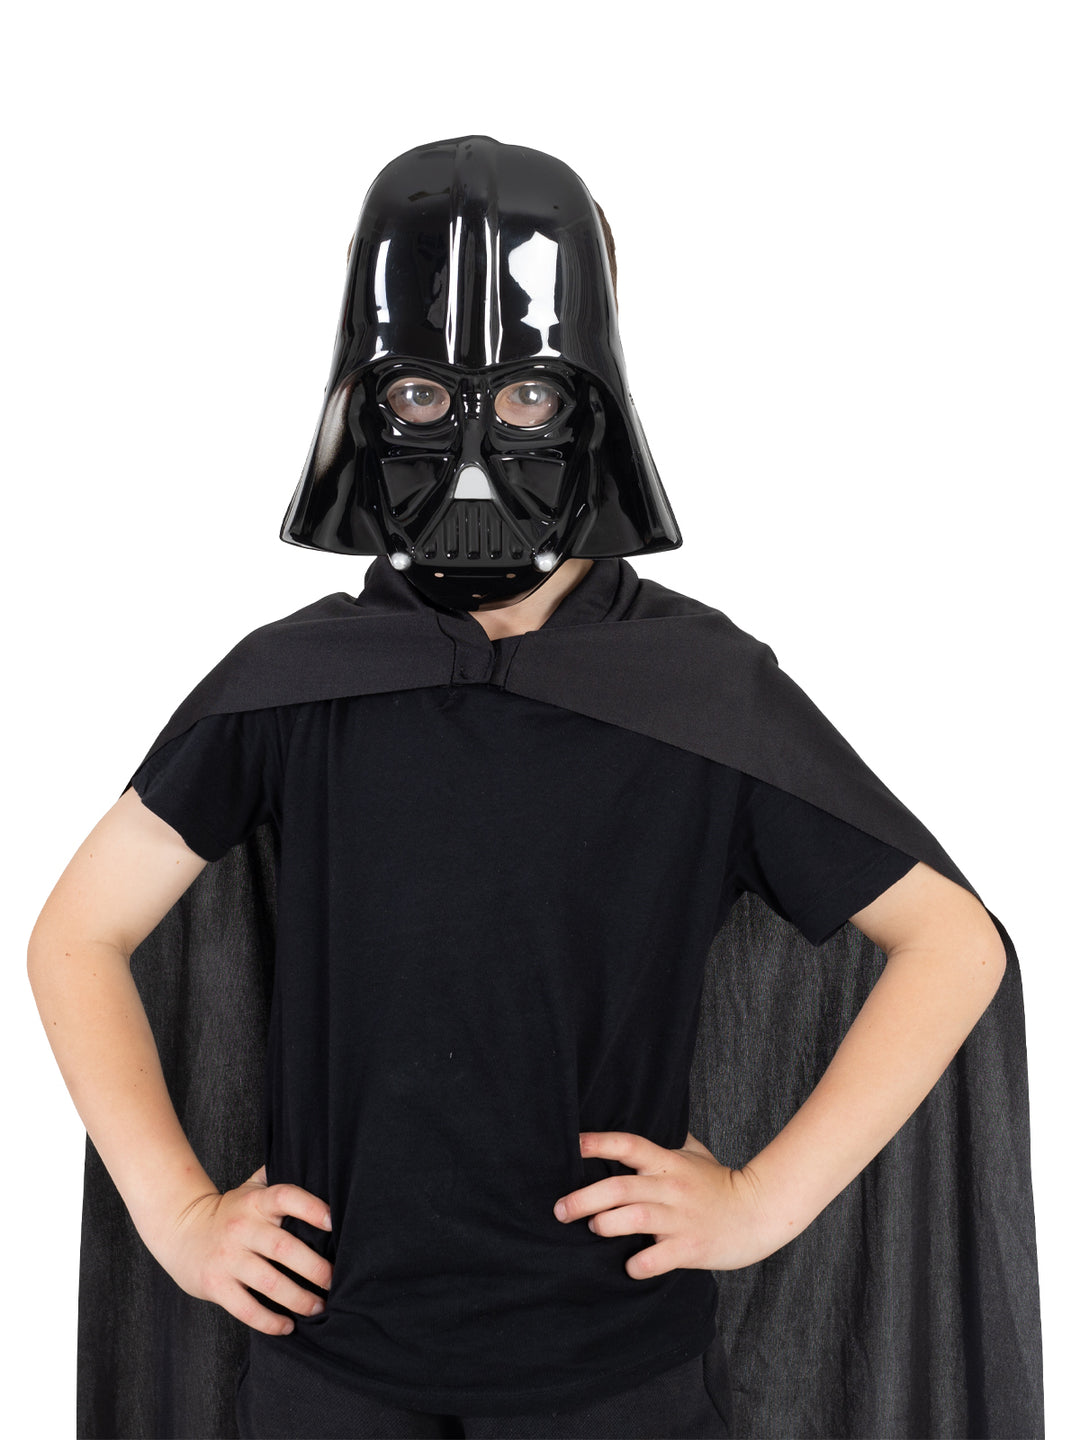 DARTH VADER CAPE AND MASK, CHILD - Little Shop of Horrors